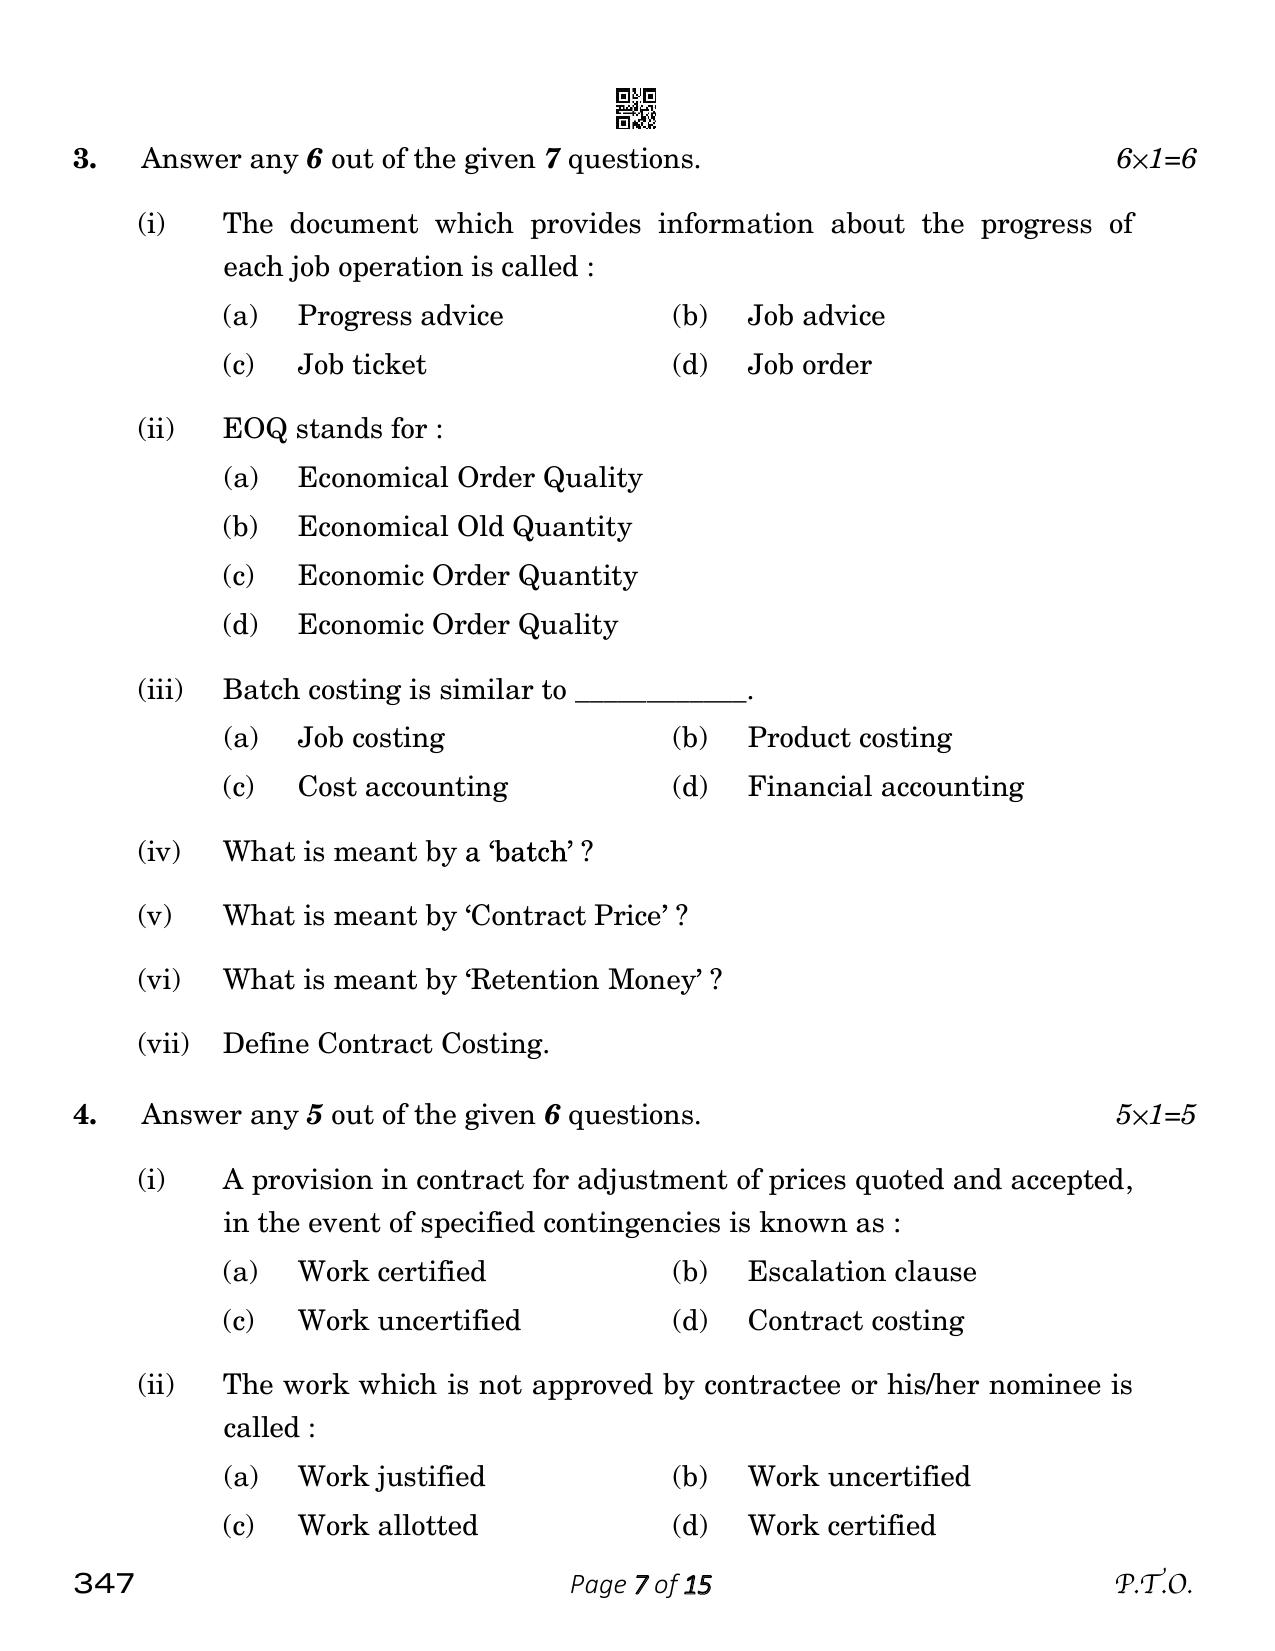 CBSE Class 12 Cost Accounting (Compartment) 2023 Question Paper - Page 7